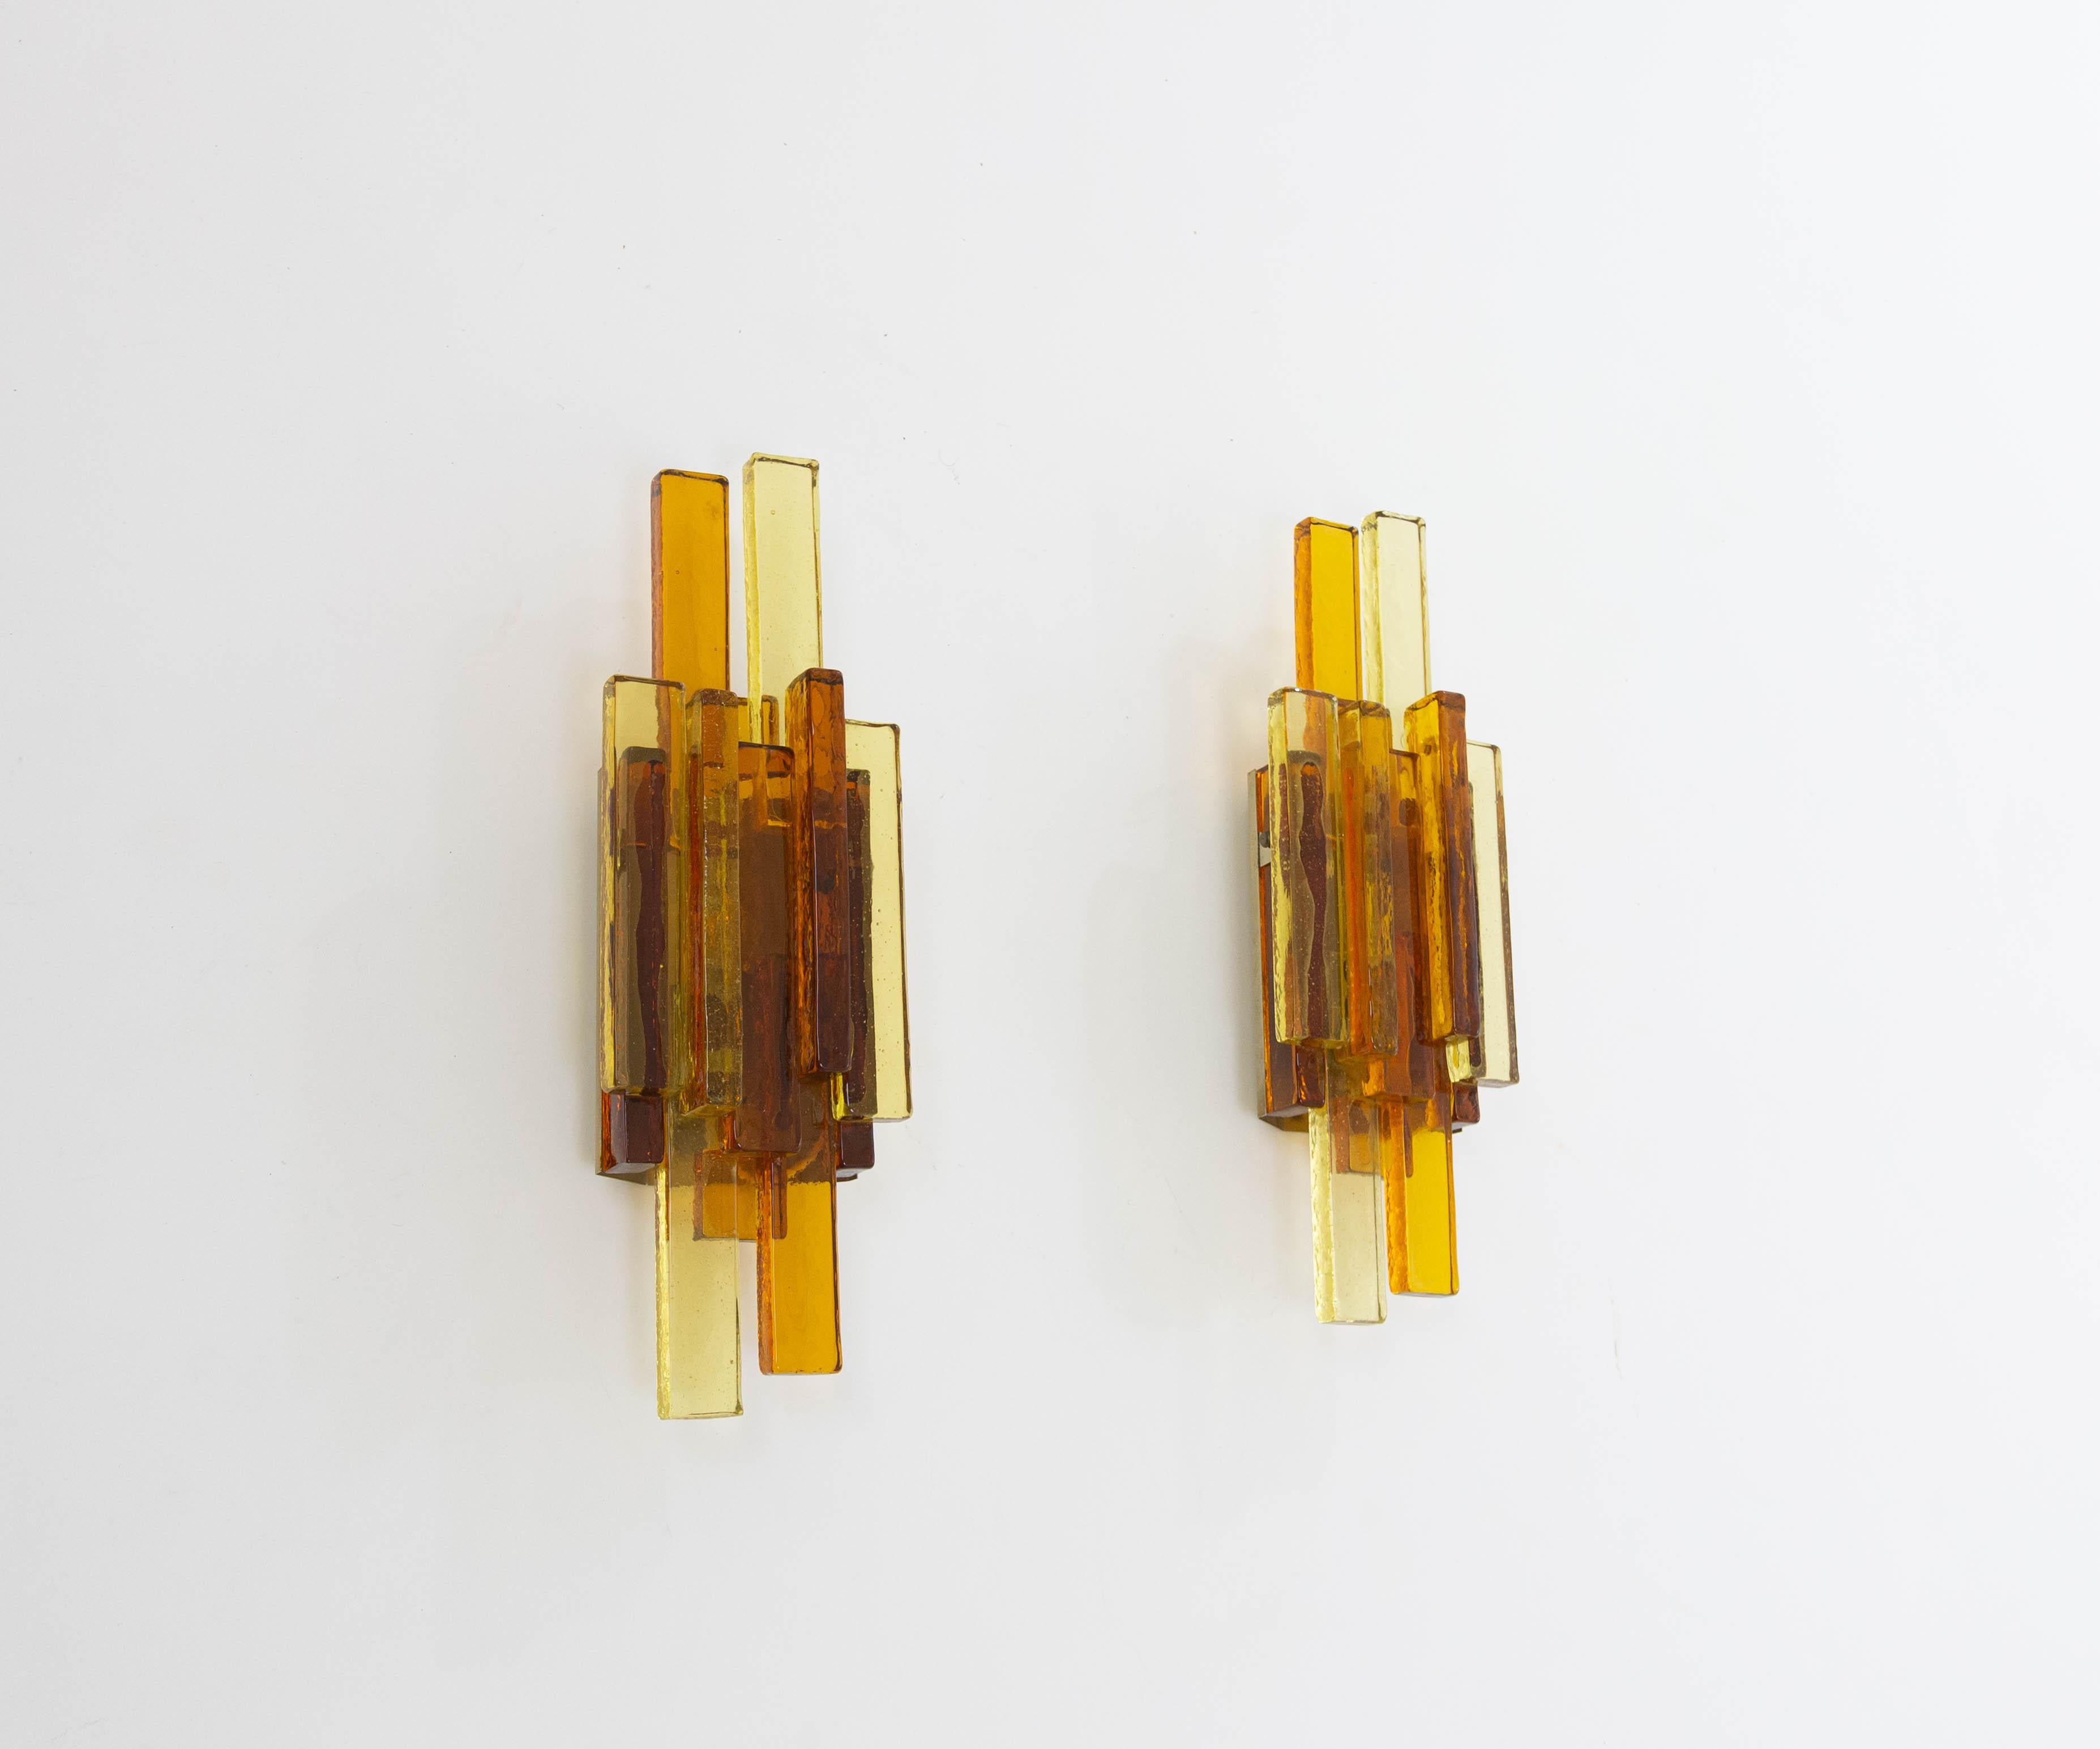 A pair of glass wall lamps No. 5104 designed by Svend Aage Holm Sørensen for his own company, Holm Sørensen & Co.

Beautifully designed with golden and amber colored glass, granting the lamps a classy appearance. 

The lamps are original and in very